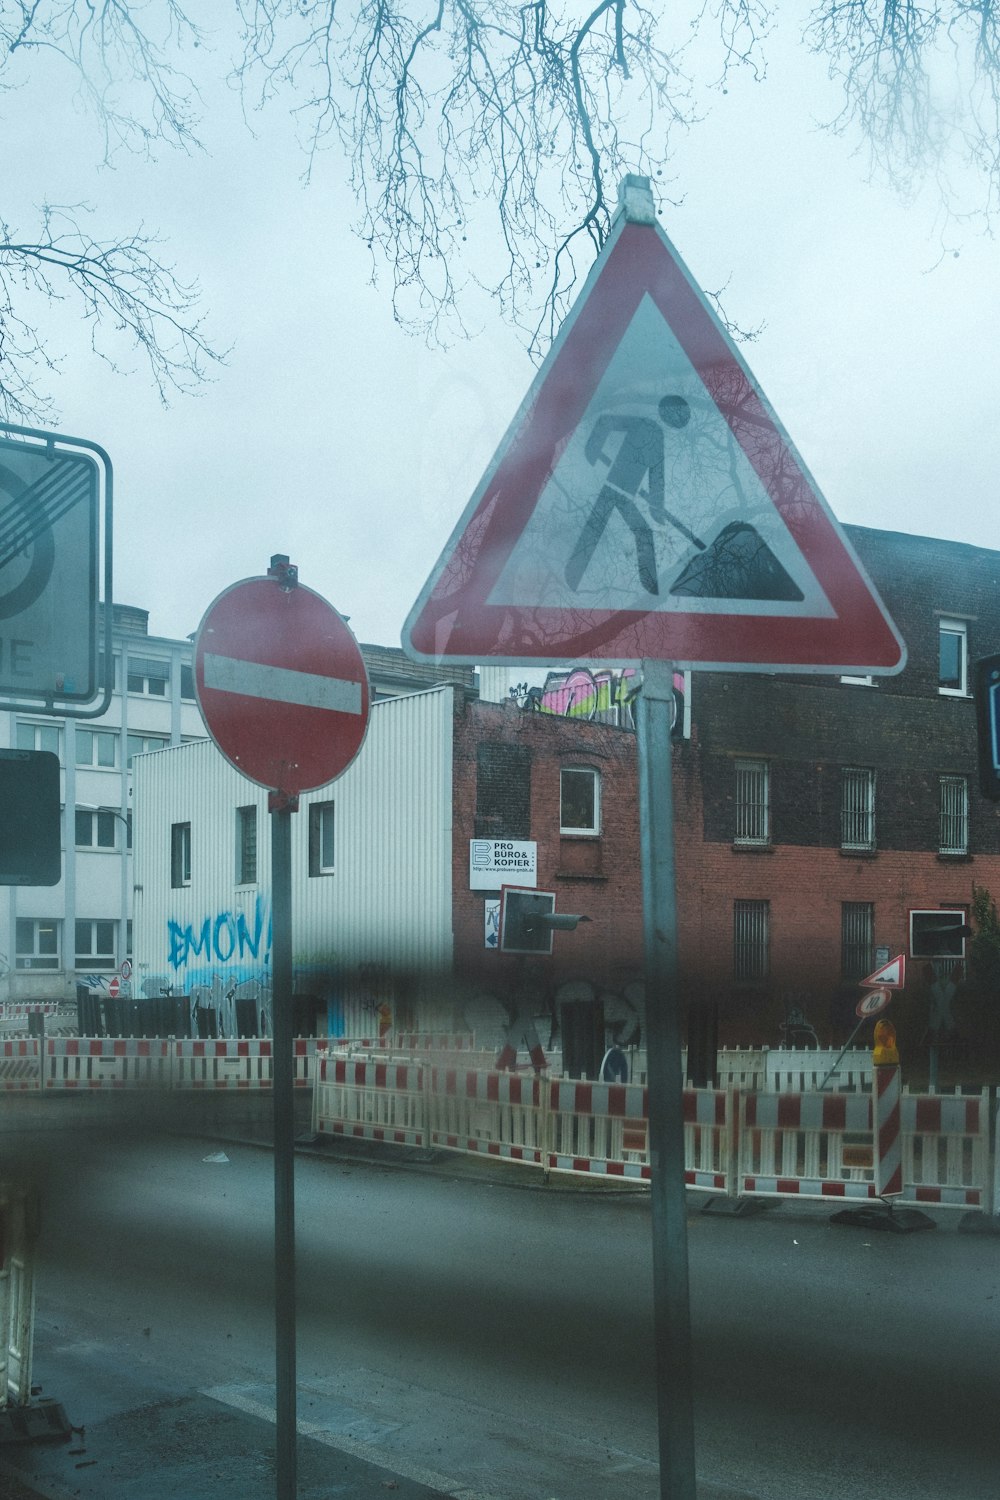 a blurry picture of a pedestrian crossing sign